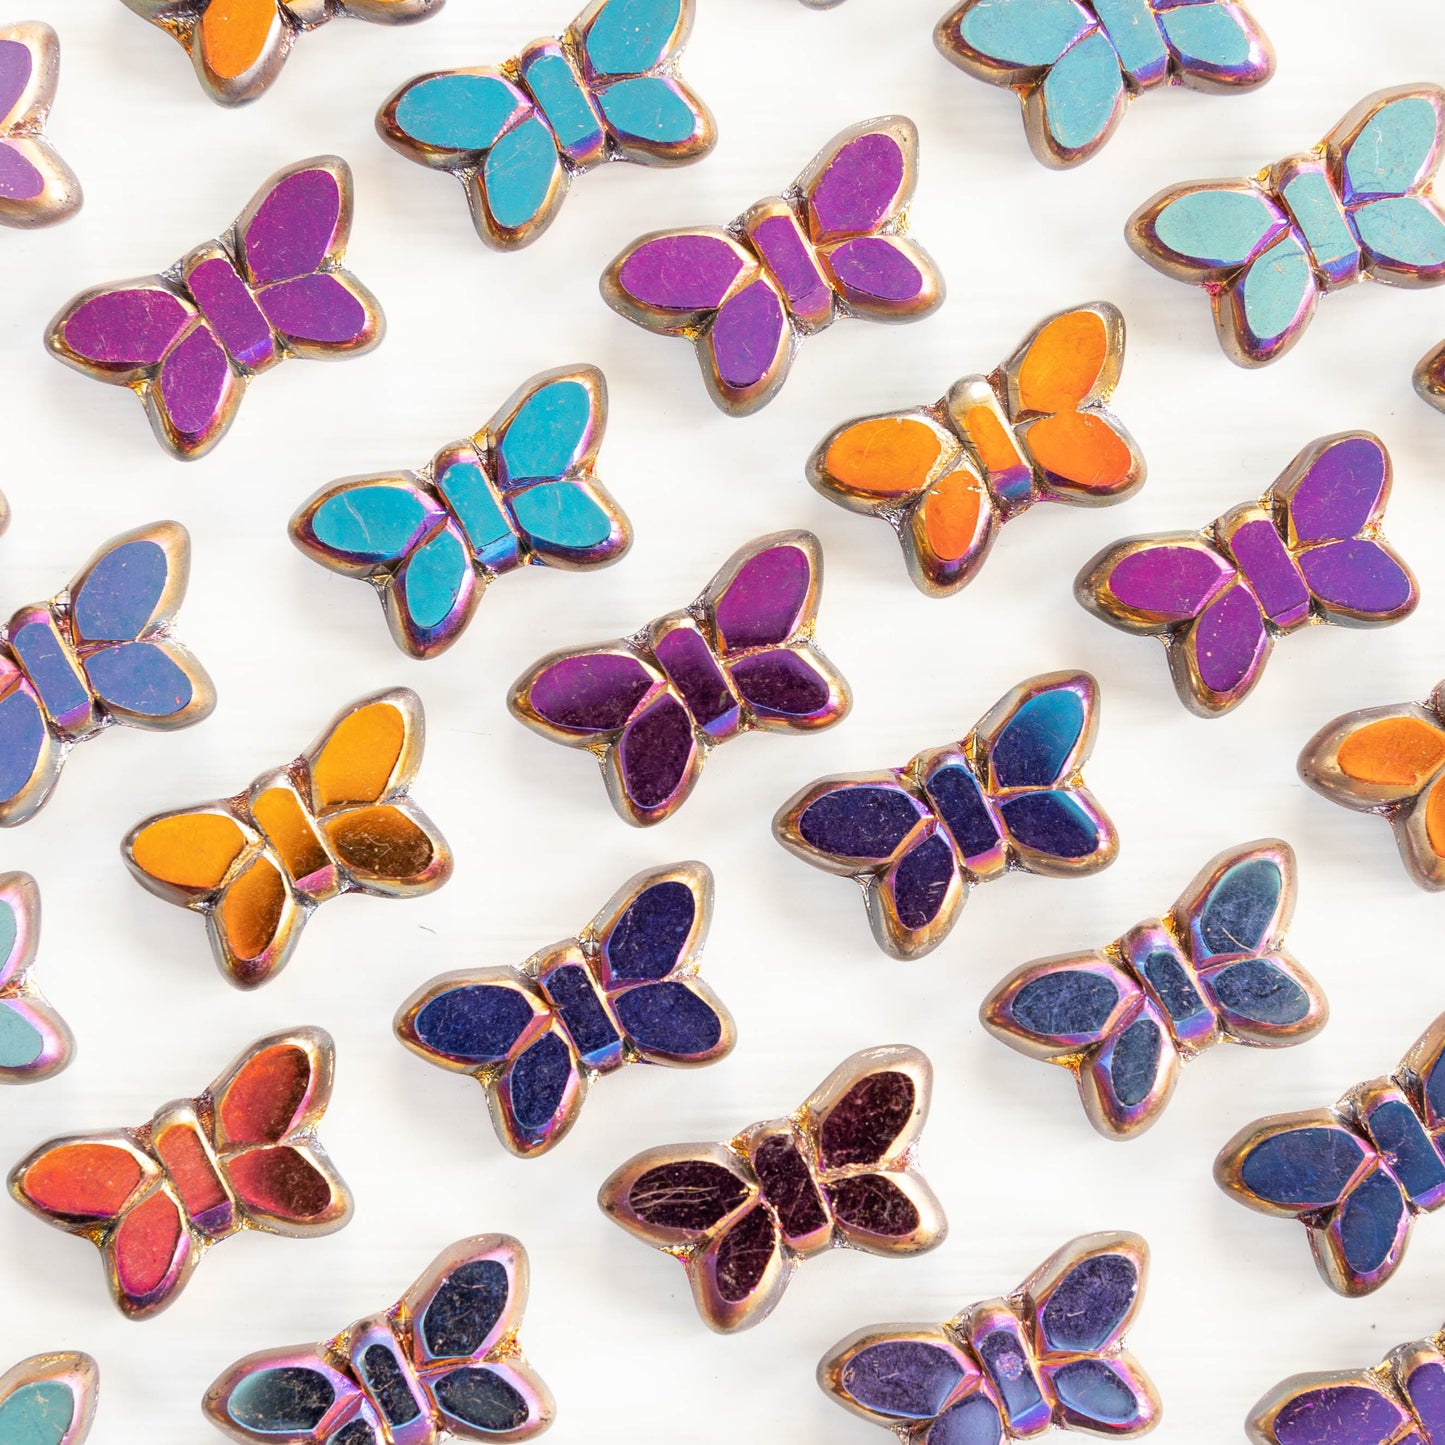 12x20mm Table Cut Butterfly Beads - Mixed Metallic